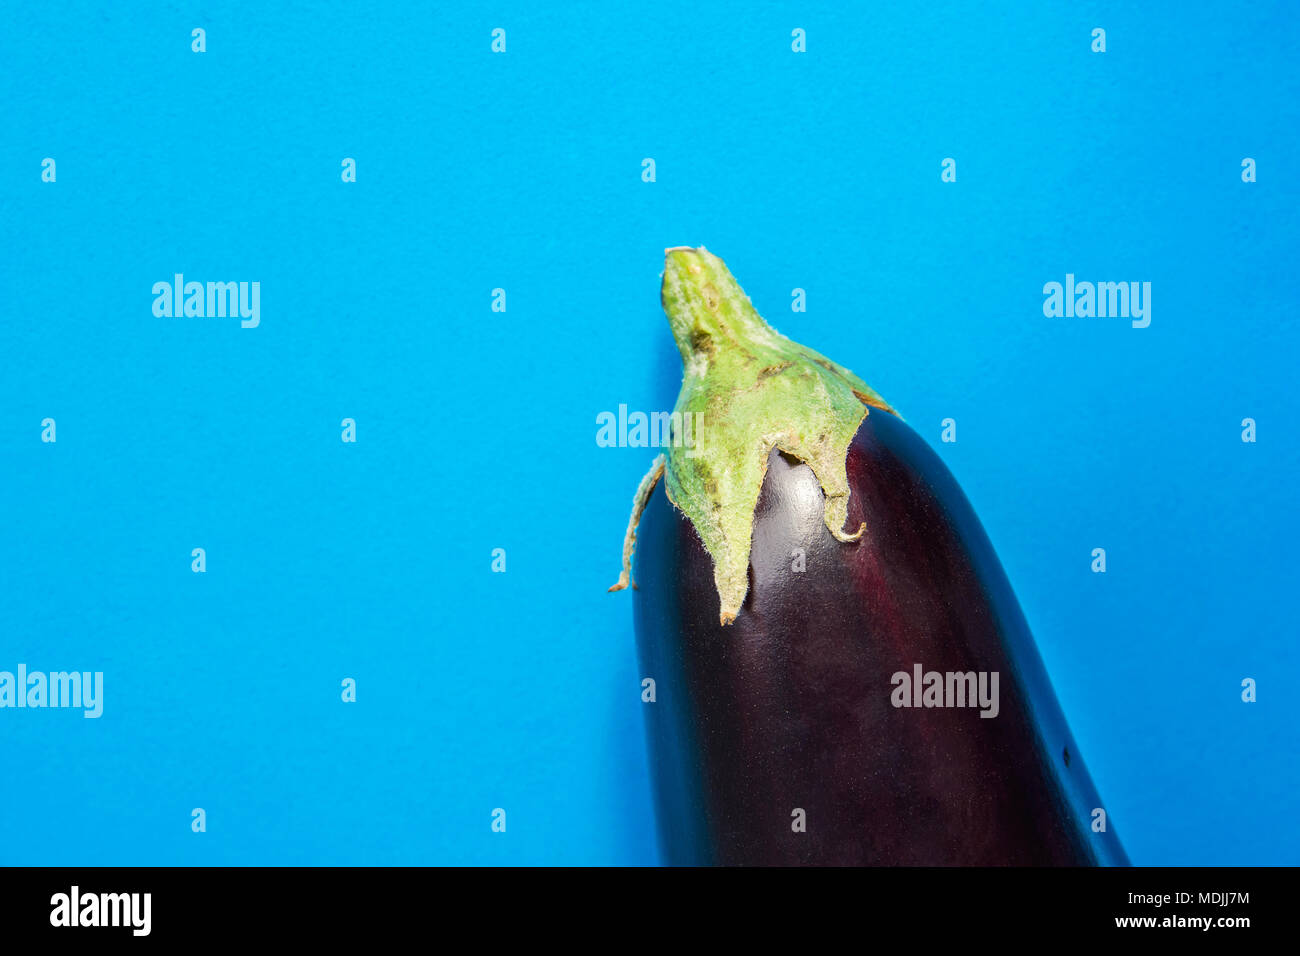 Single Ripe Organic Whole Eggplant with Green Calyx on Blue Background. Vitamins Healthy Diet Summer Autumn Superfoods Concept. Mediterranean Cuisine. Stock Photo